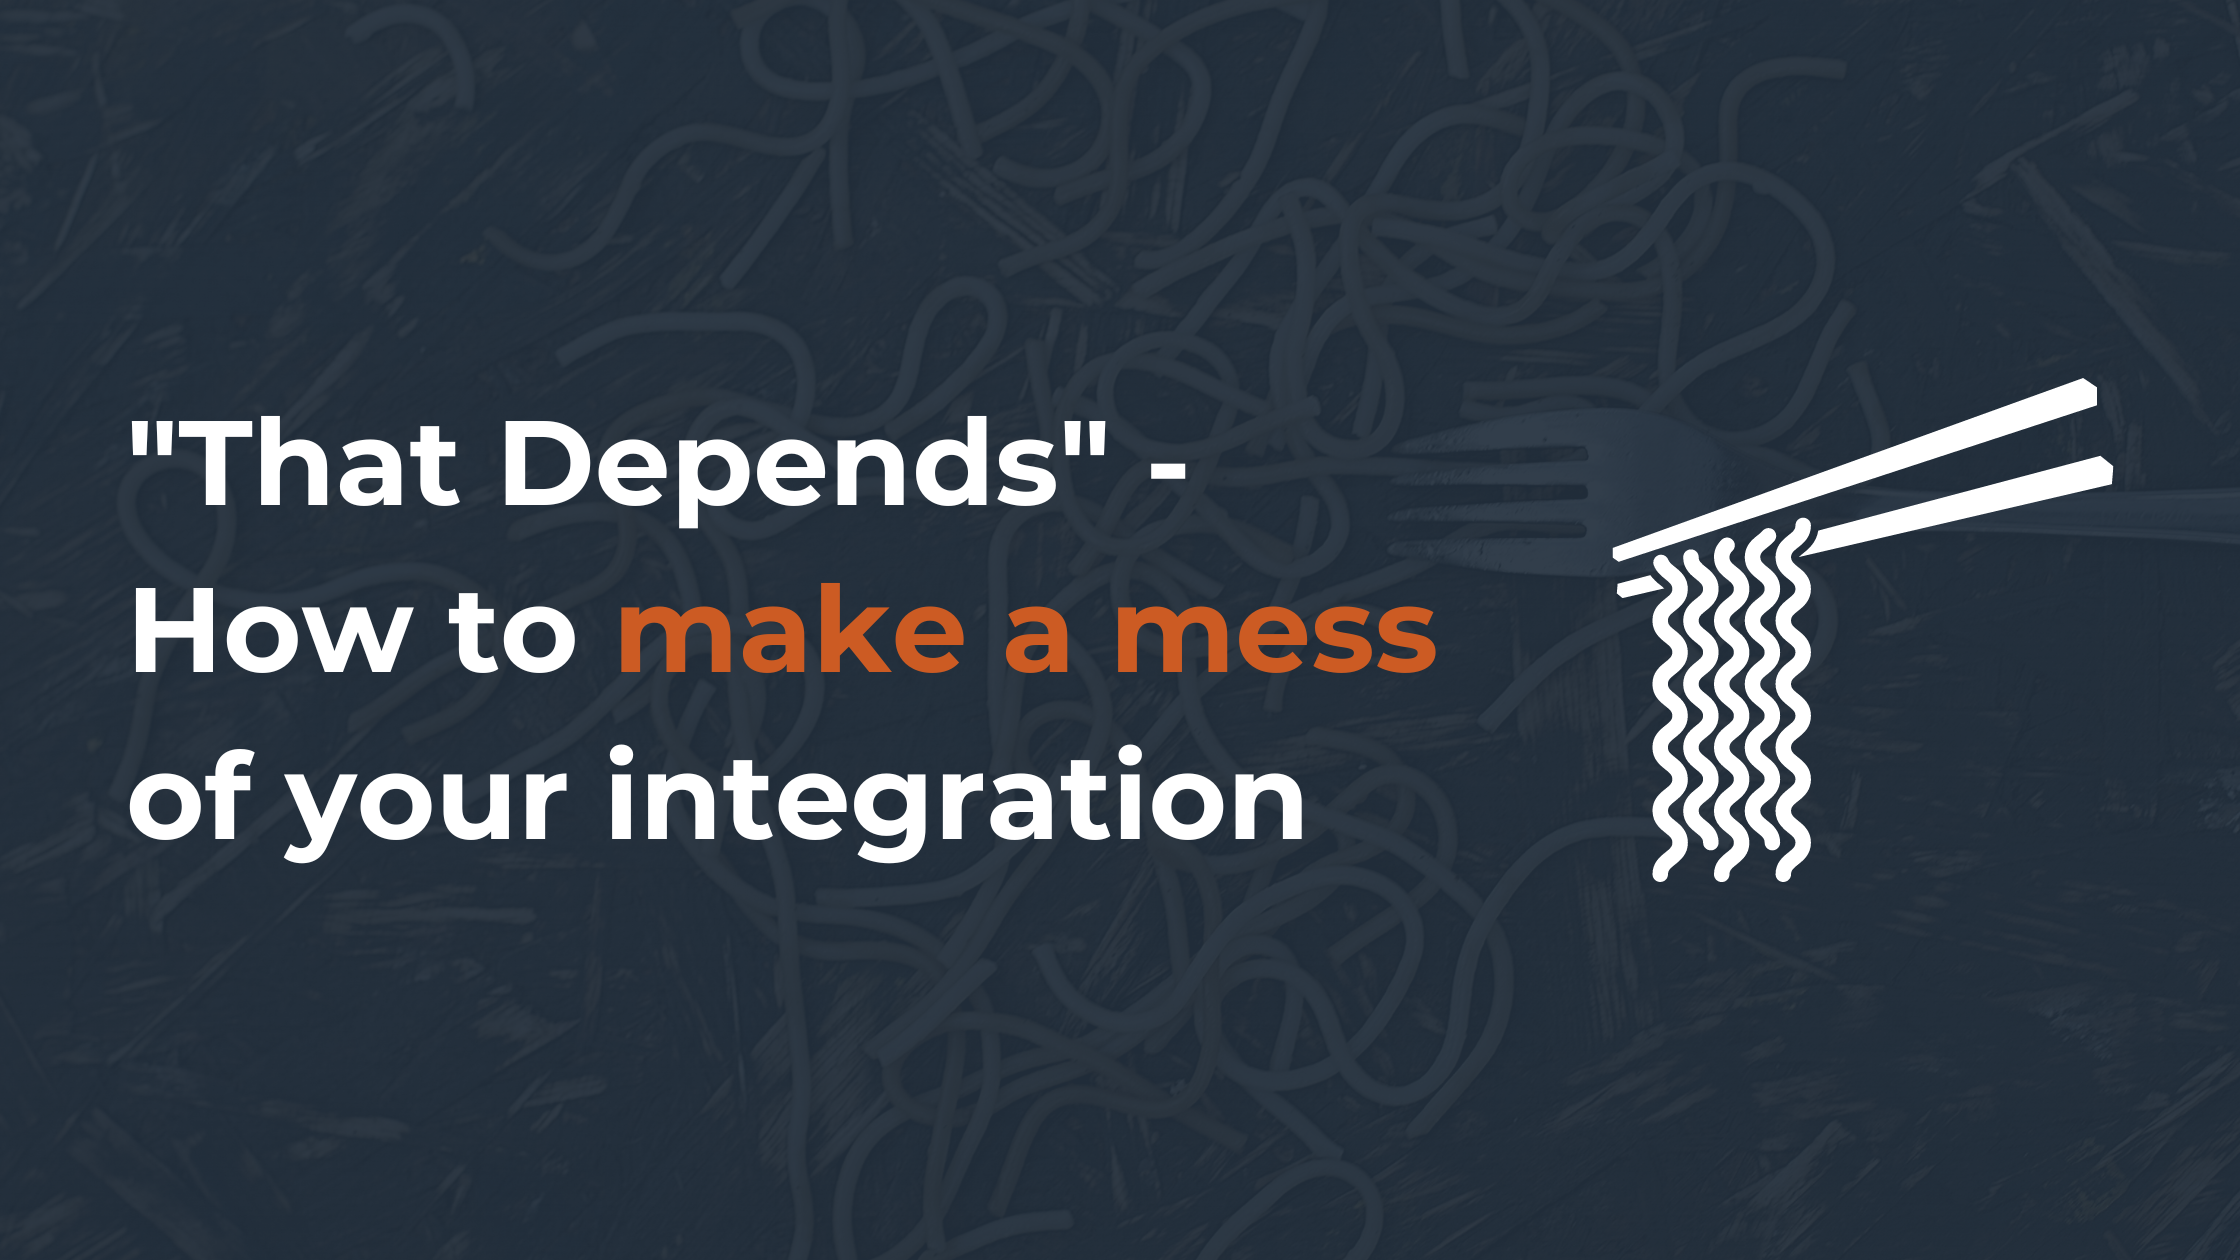 That Depends - How to make a mess of your integration